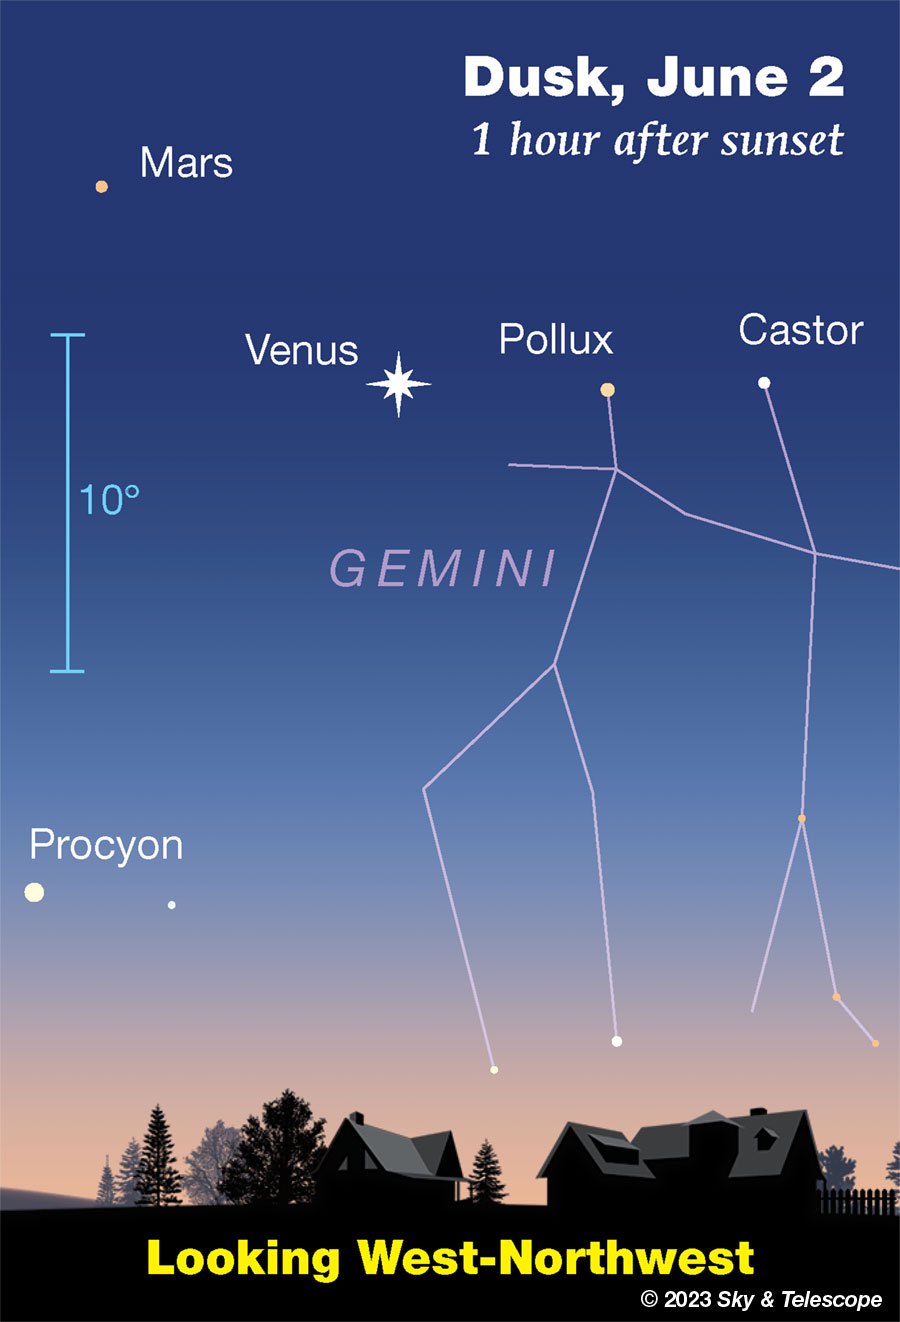 Venus lines up with Pollux and Castor on June 1 and 2, while Mars looks on.